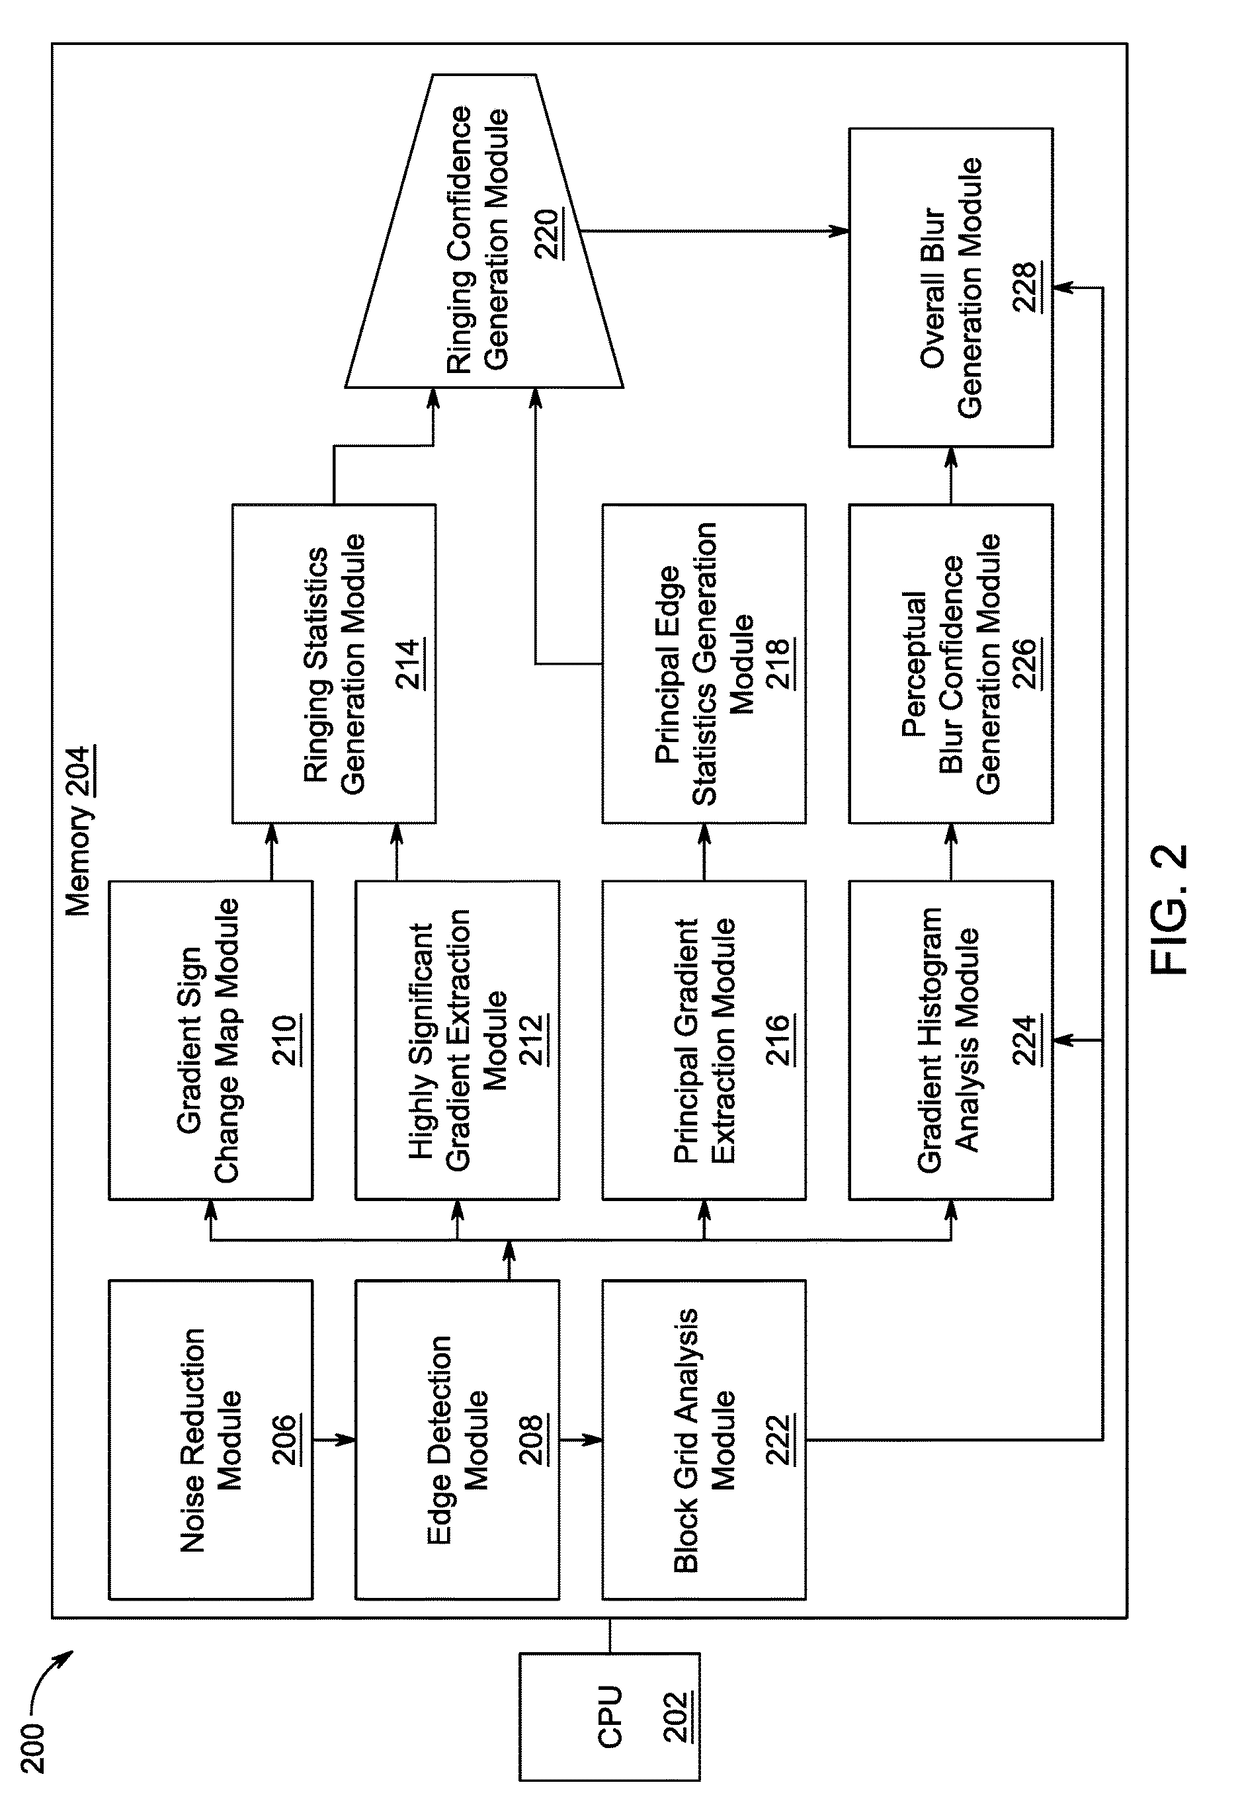 Methods and systems for detection of blur artifact in digital video due to high quantization